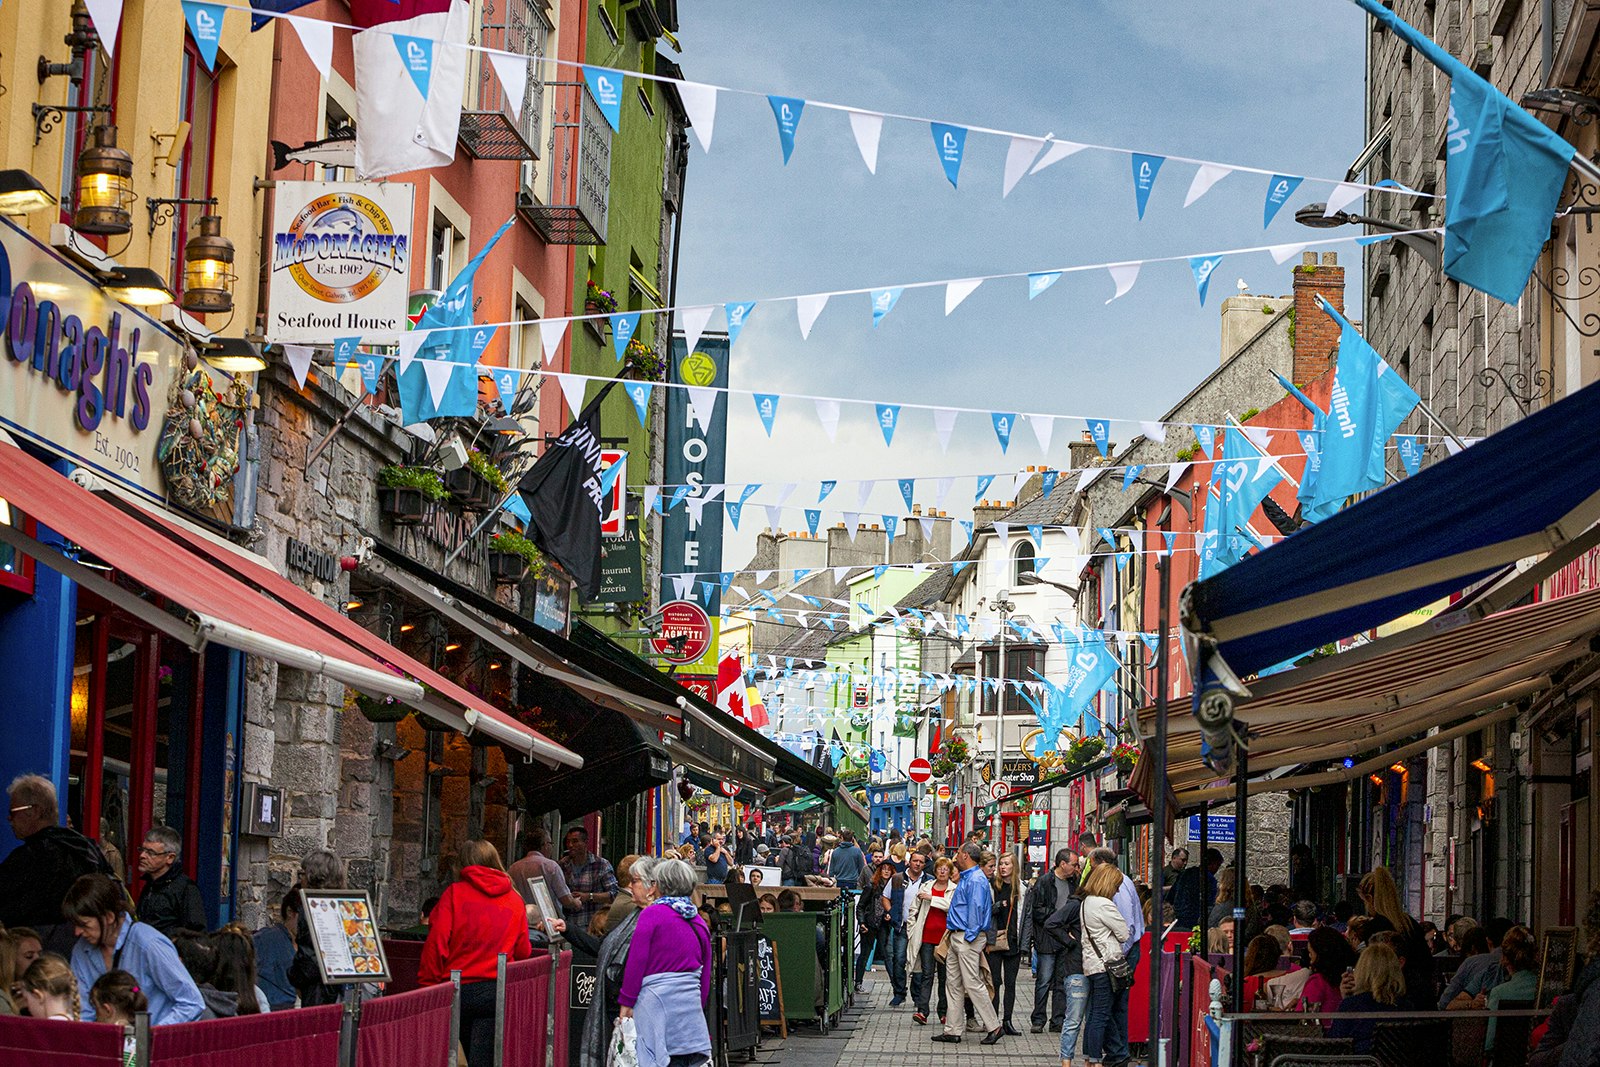 People walk down a crowded historic street lined with shops and bars. Pennants zig zag between the buildings above the street. Galway, Ireland.